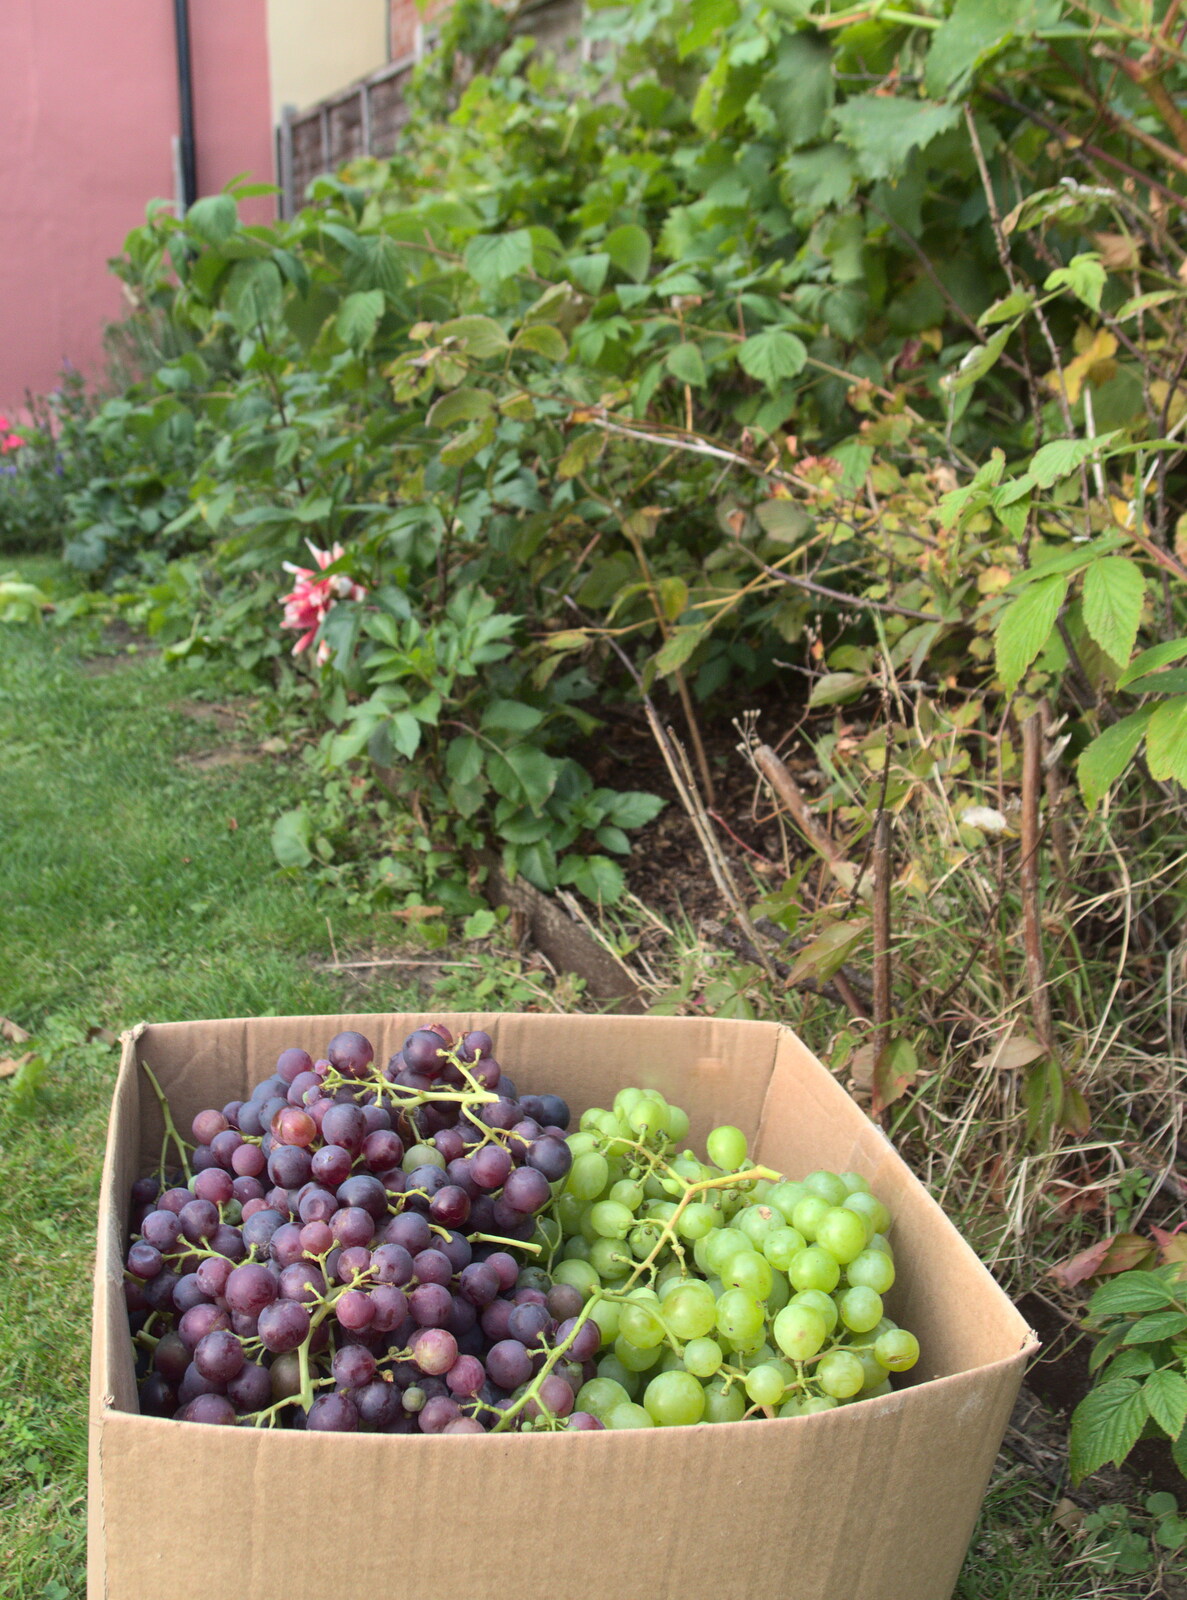 Some of this year's grape harvest from A Miscellany, Norwich , Norfolk - 30th September 2018